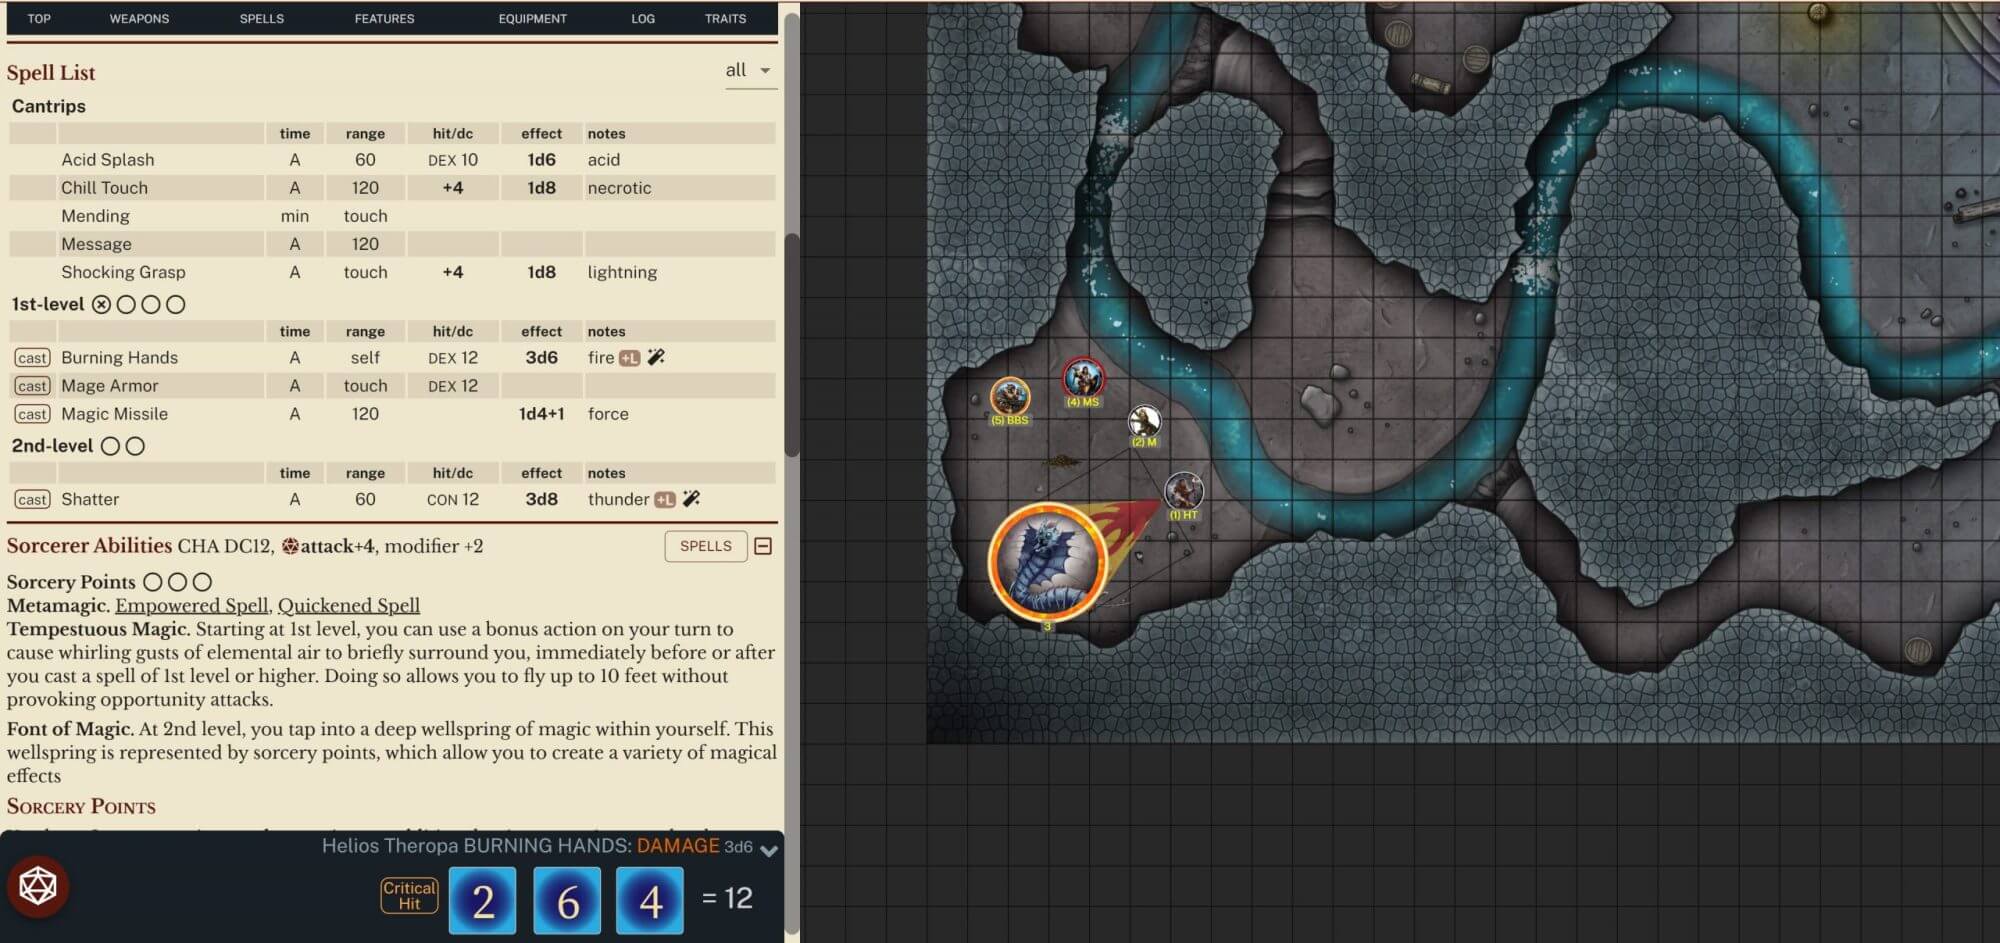 Roll20: Online virtual tabletop for pen and paper RPGs and board games